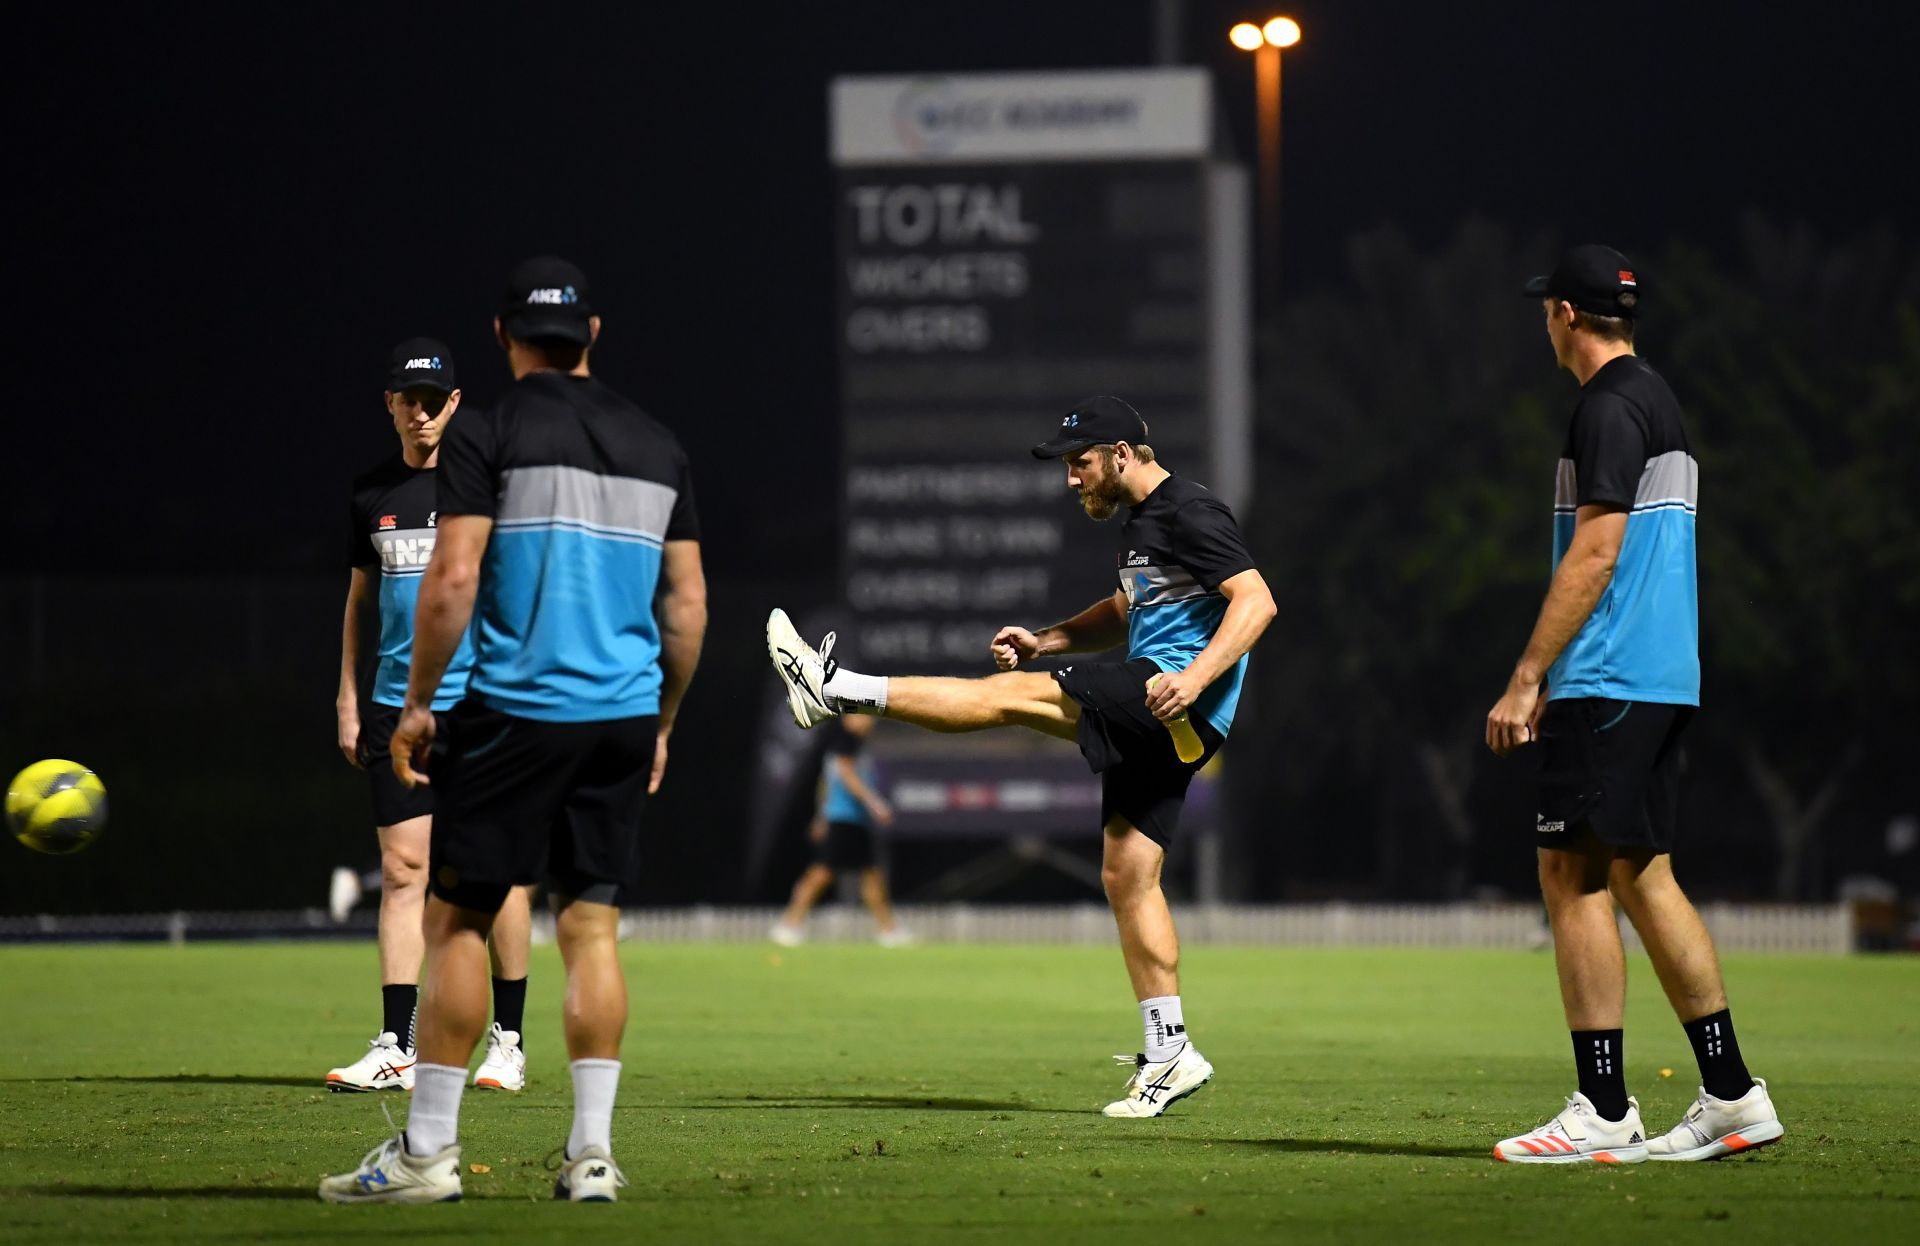 Several New Zealand players will skip the Netherlands series for the 2022 IPL